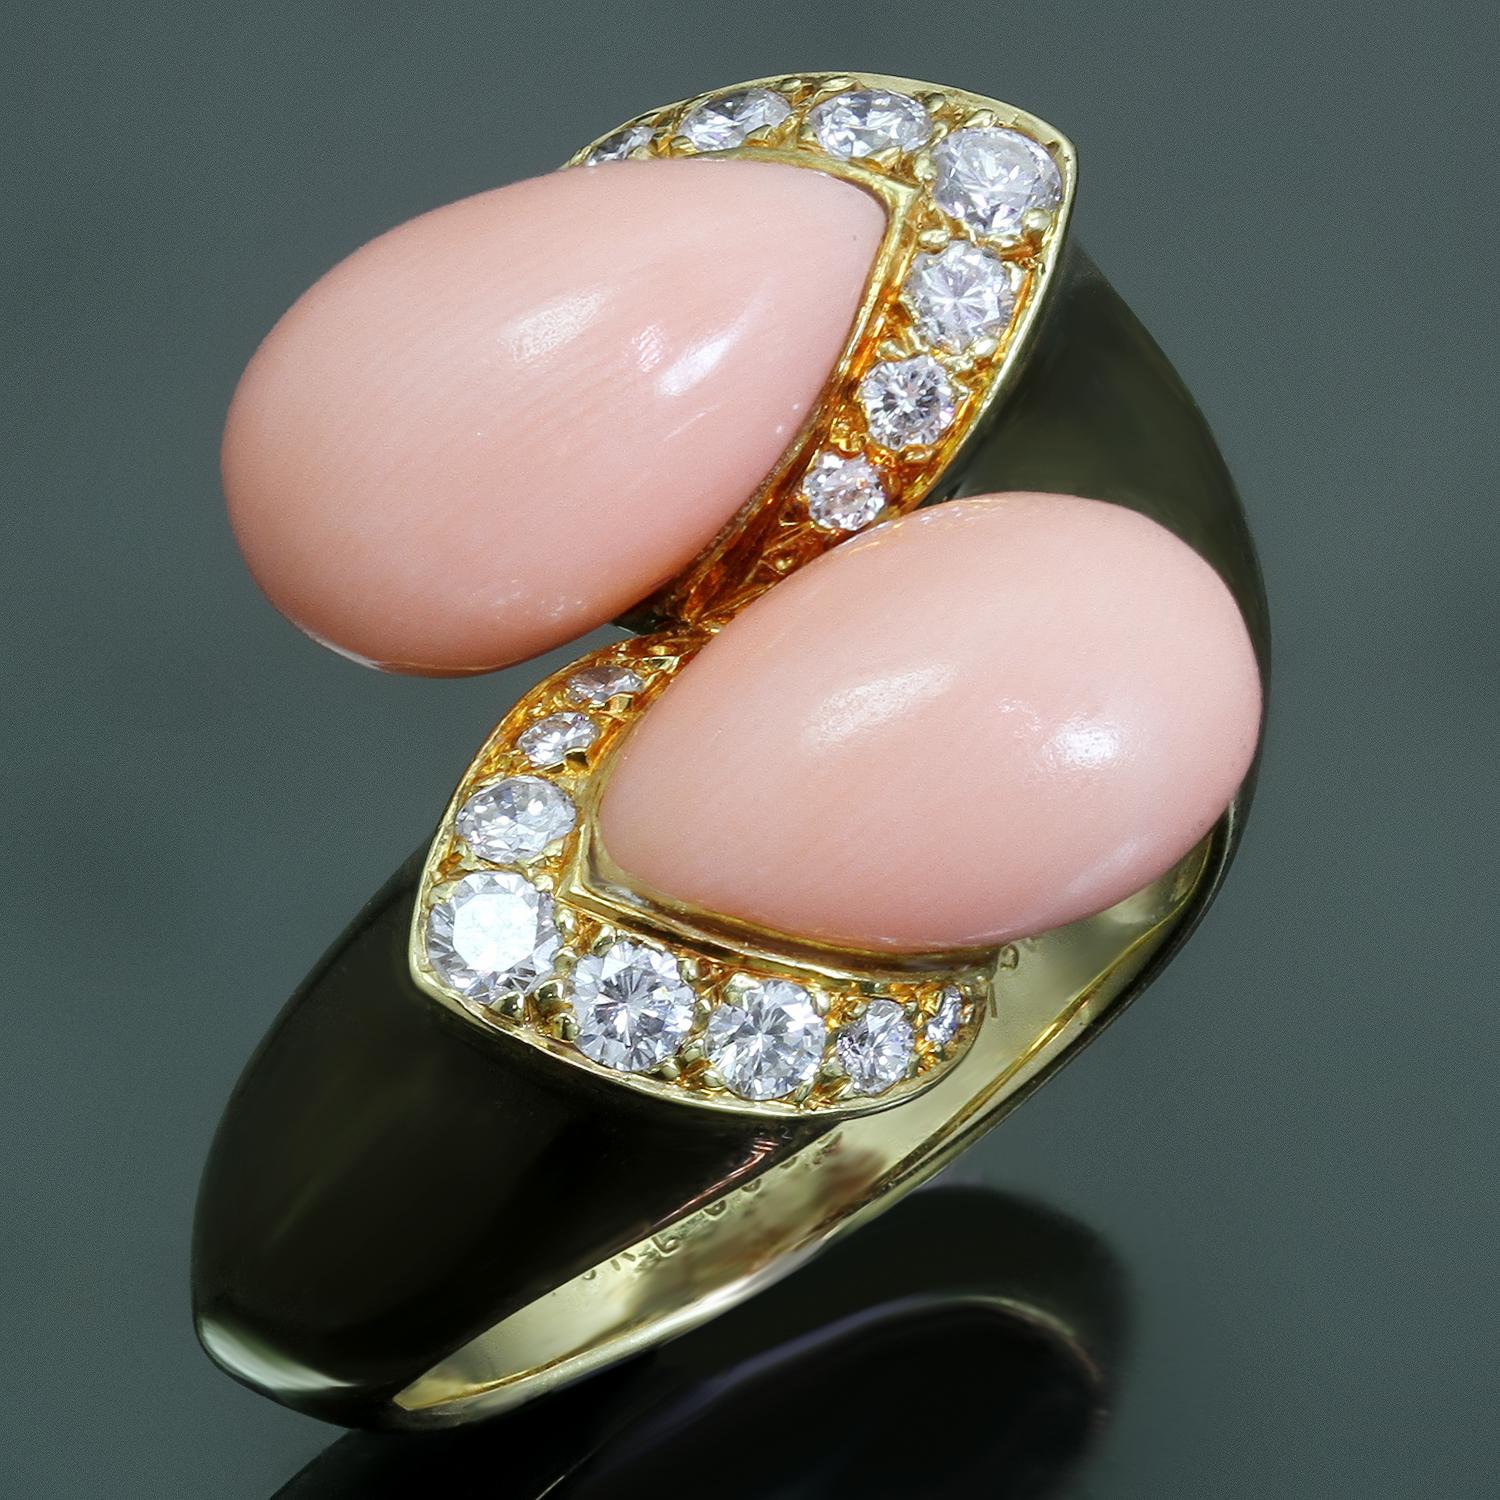 This beautiful vintage Van Cleef & Arpels ring is crafted in 18k yellow gold and set with 7.0mm x 11.0mm corals and round brilliant E-F VVS2-VS1 diamonds weighing an estimated 0.35 carats. Made in France circa 1970s. Measurements: 0.62